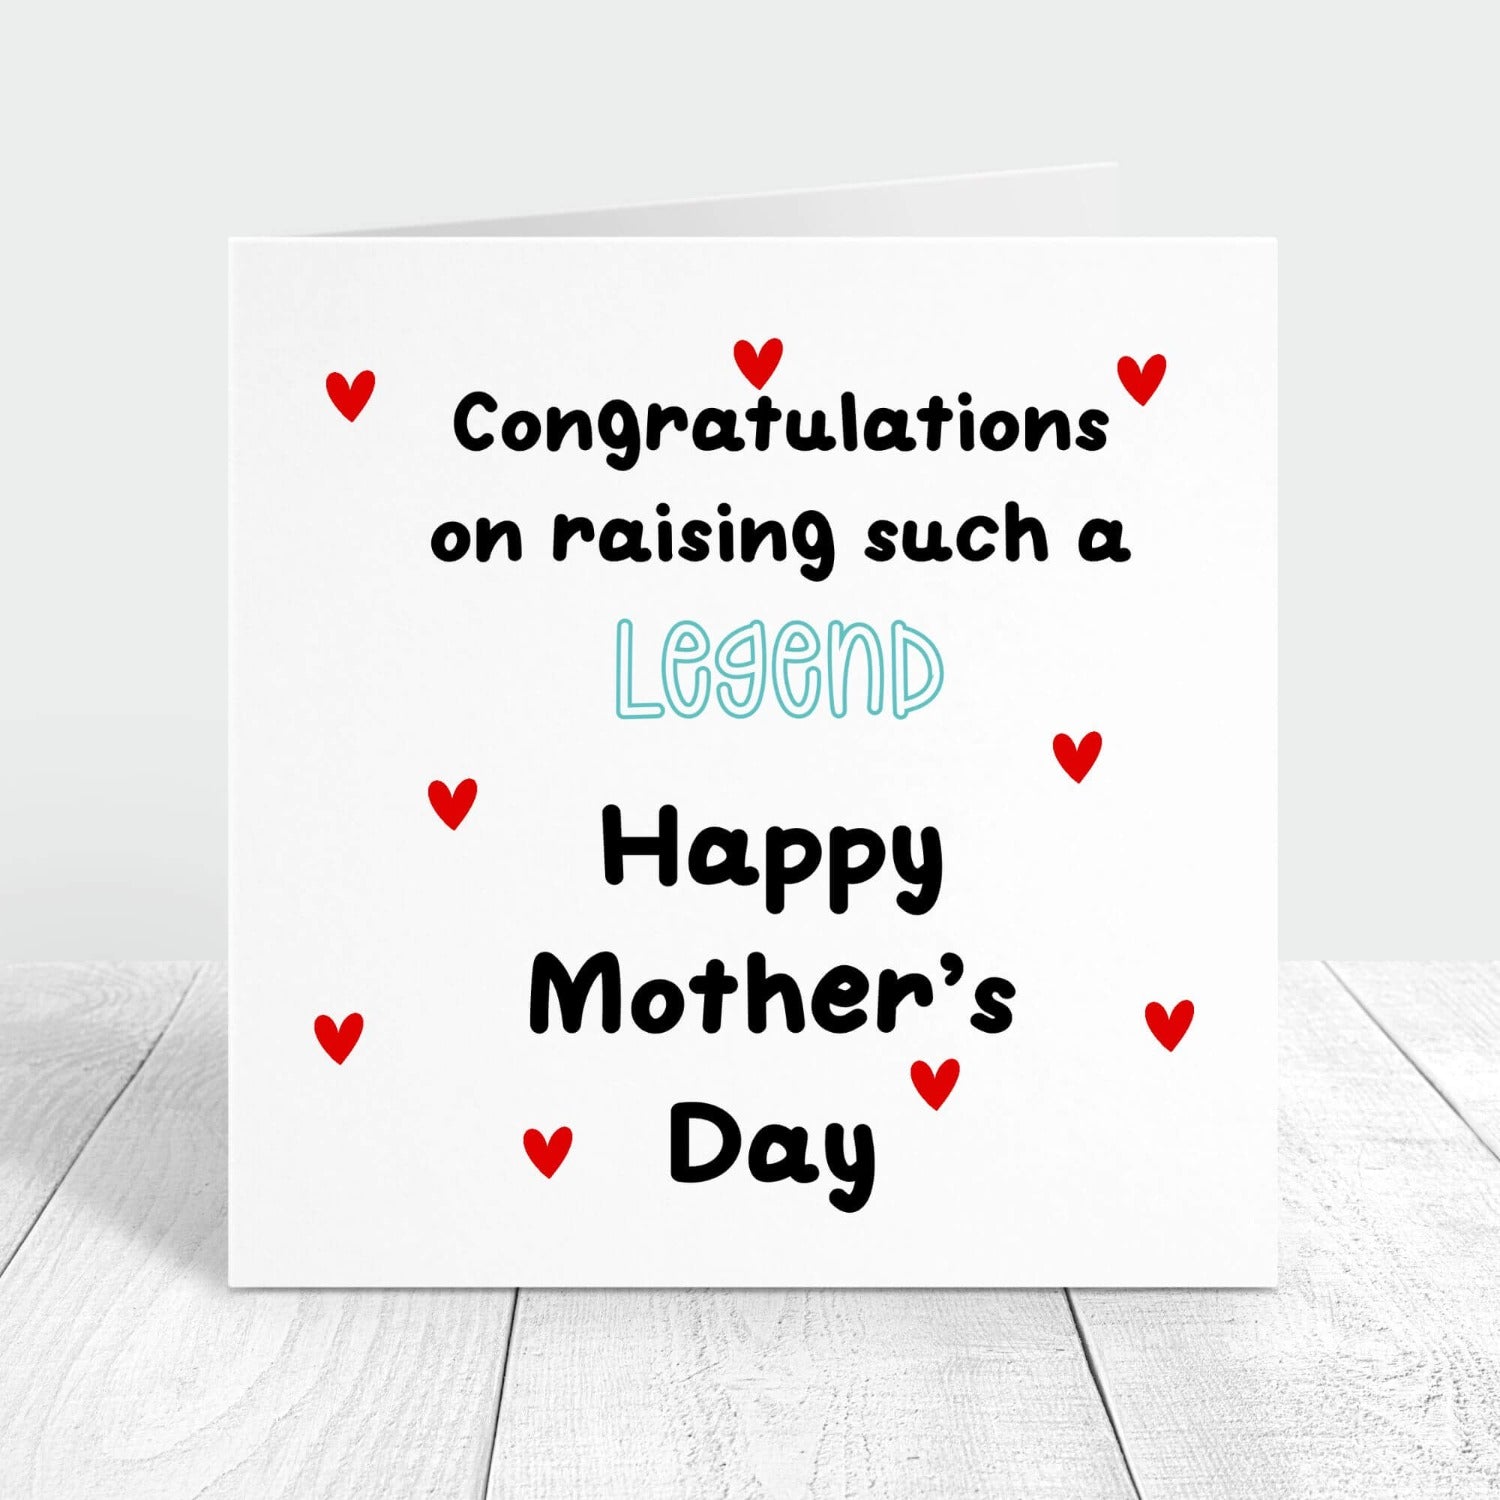 Congratulations on raising a legend personalised mothers day card